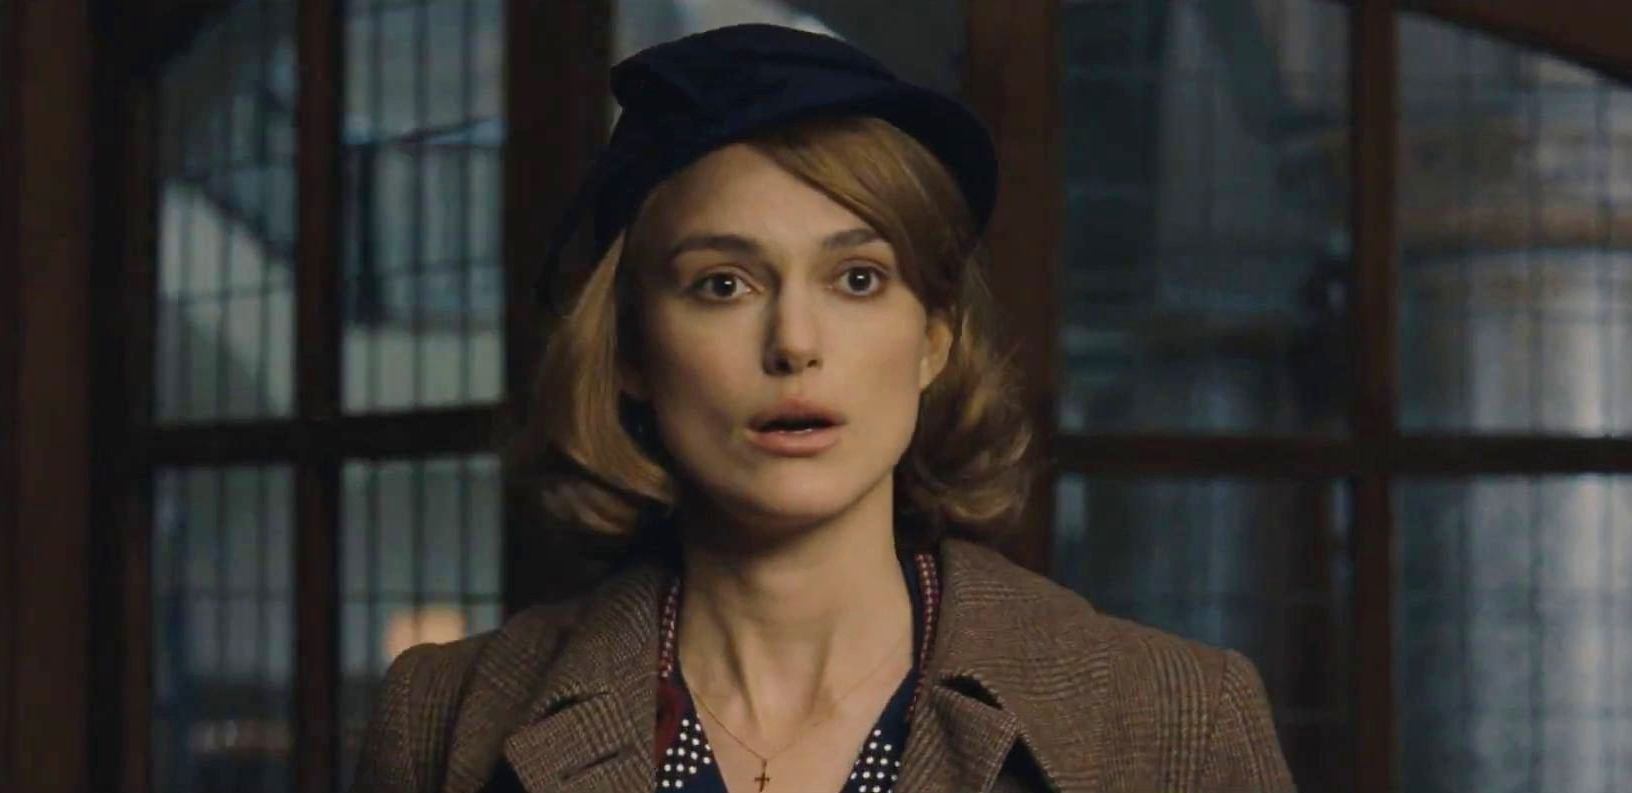 keira-knightley-in-the-imitation-game-movie-3